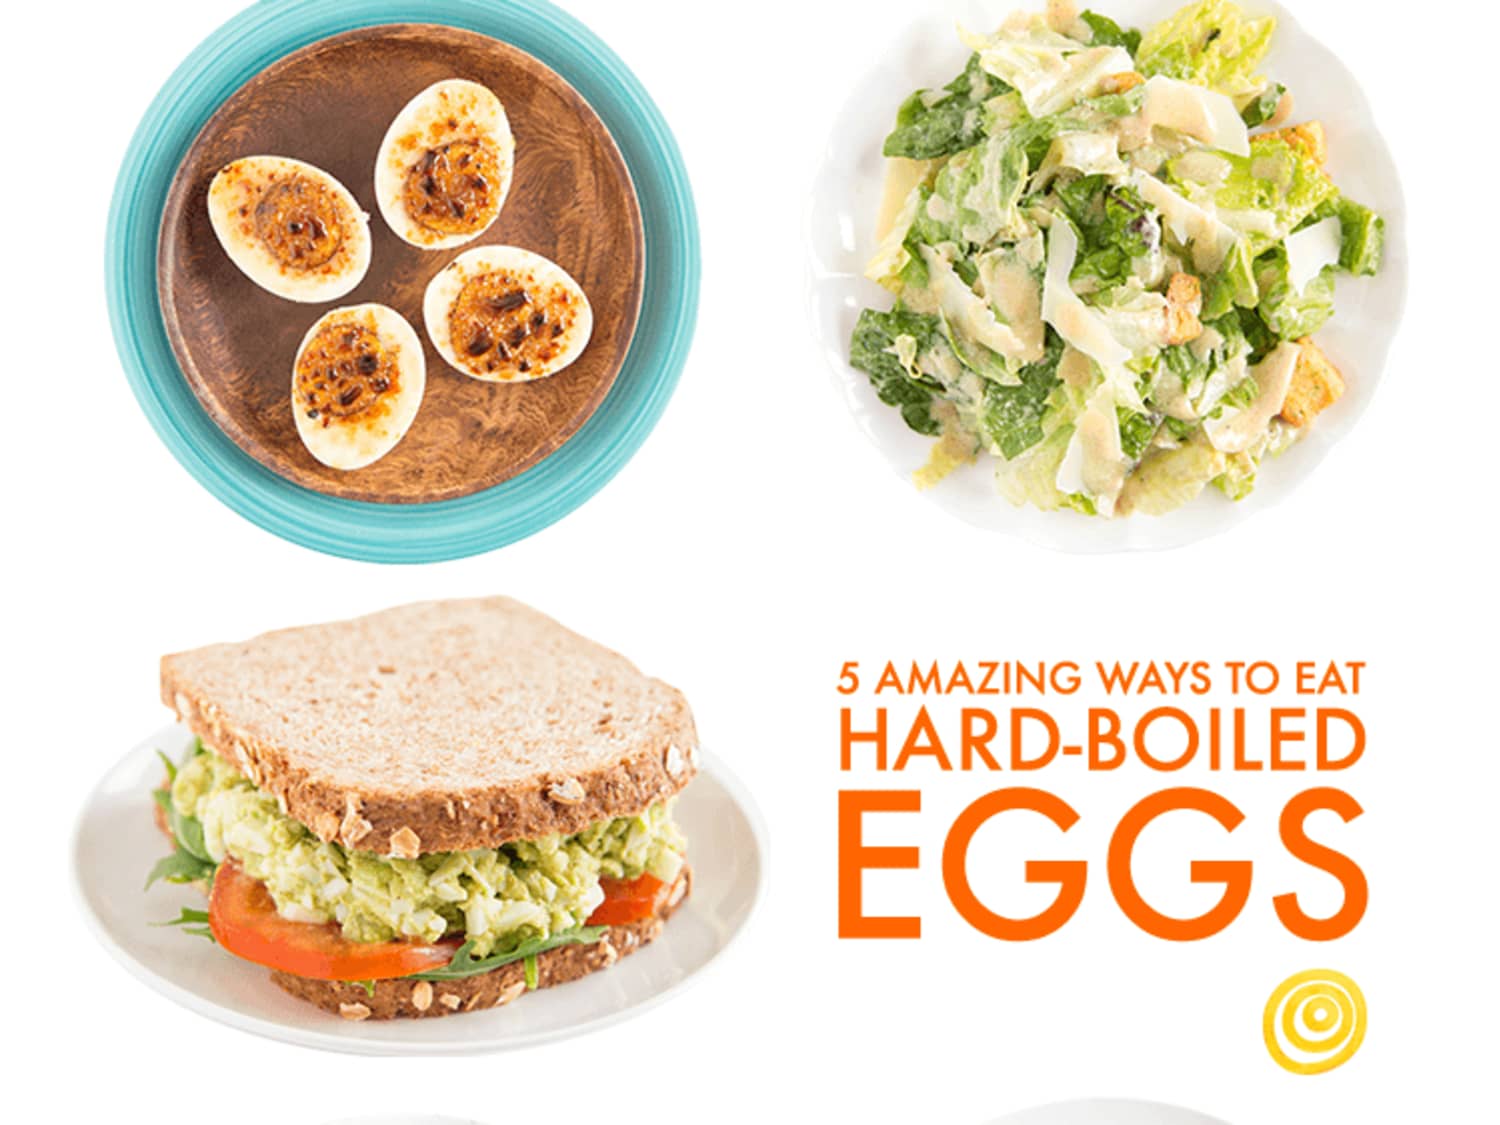 What to Put on Hard-Boiled Eggs